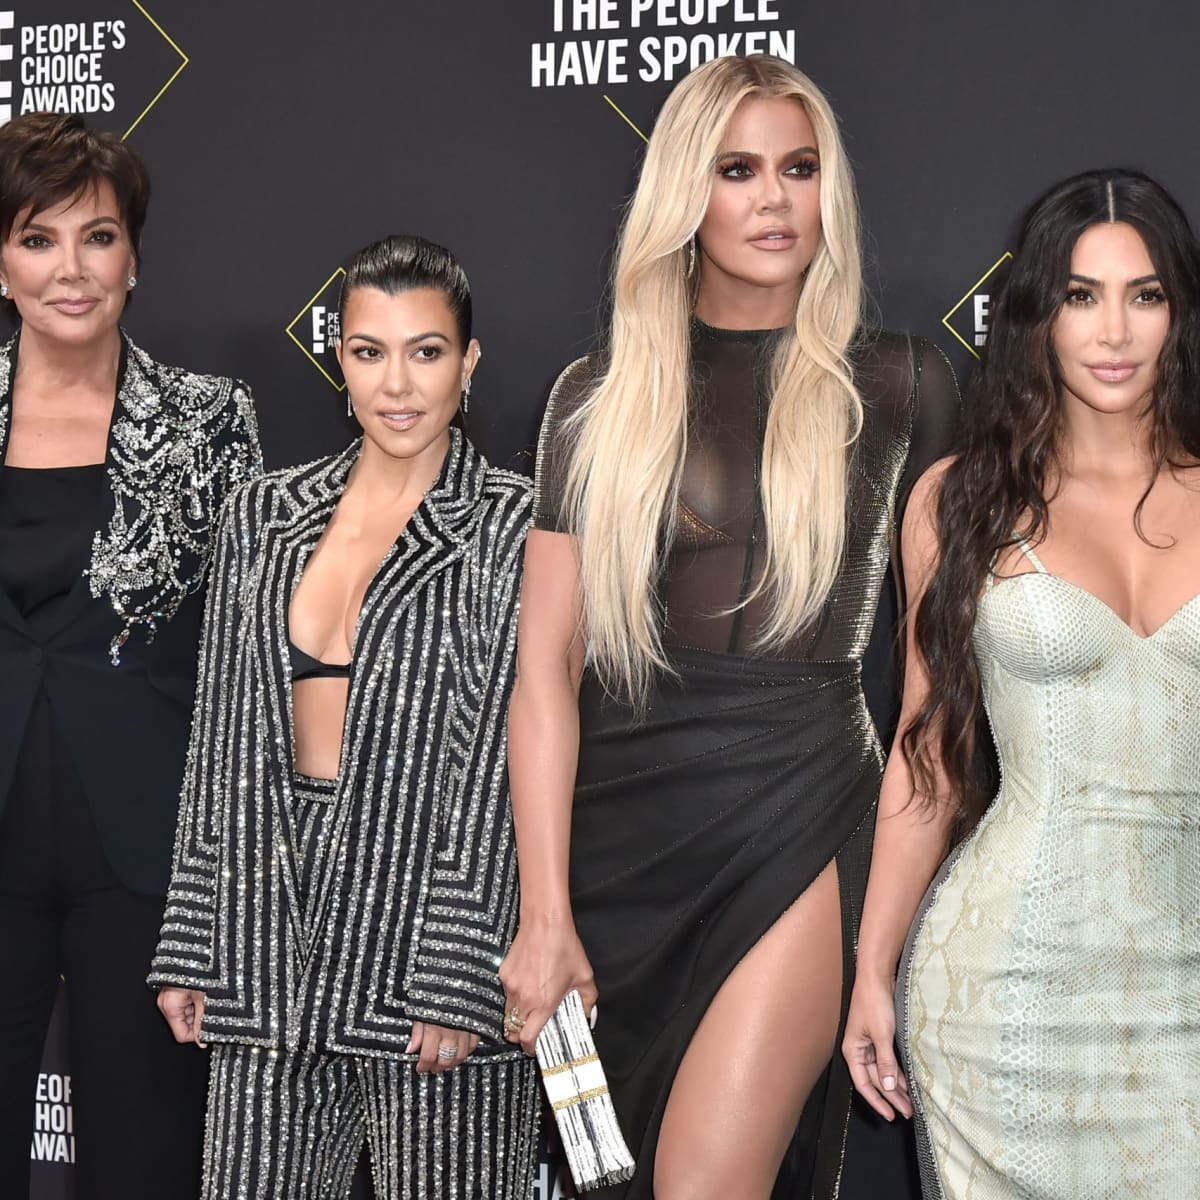 Kardashian Dash stores to close after 12 years in business - Vogue